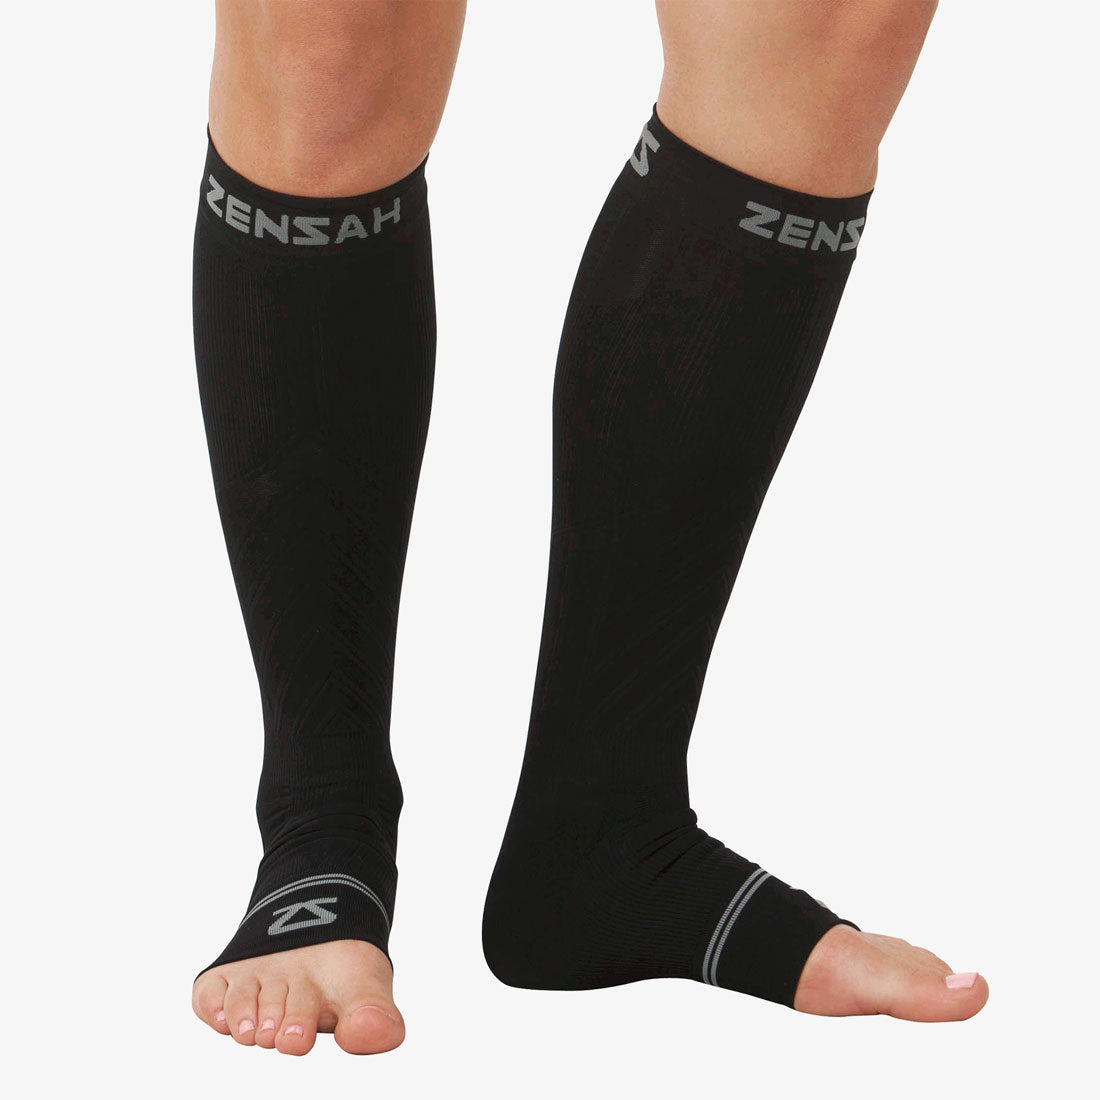 Tsseiatte Calf Compression Sleeves, Adults Footless Compression